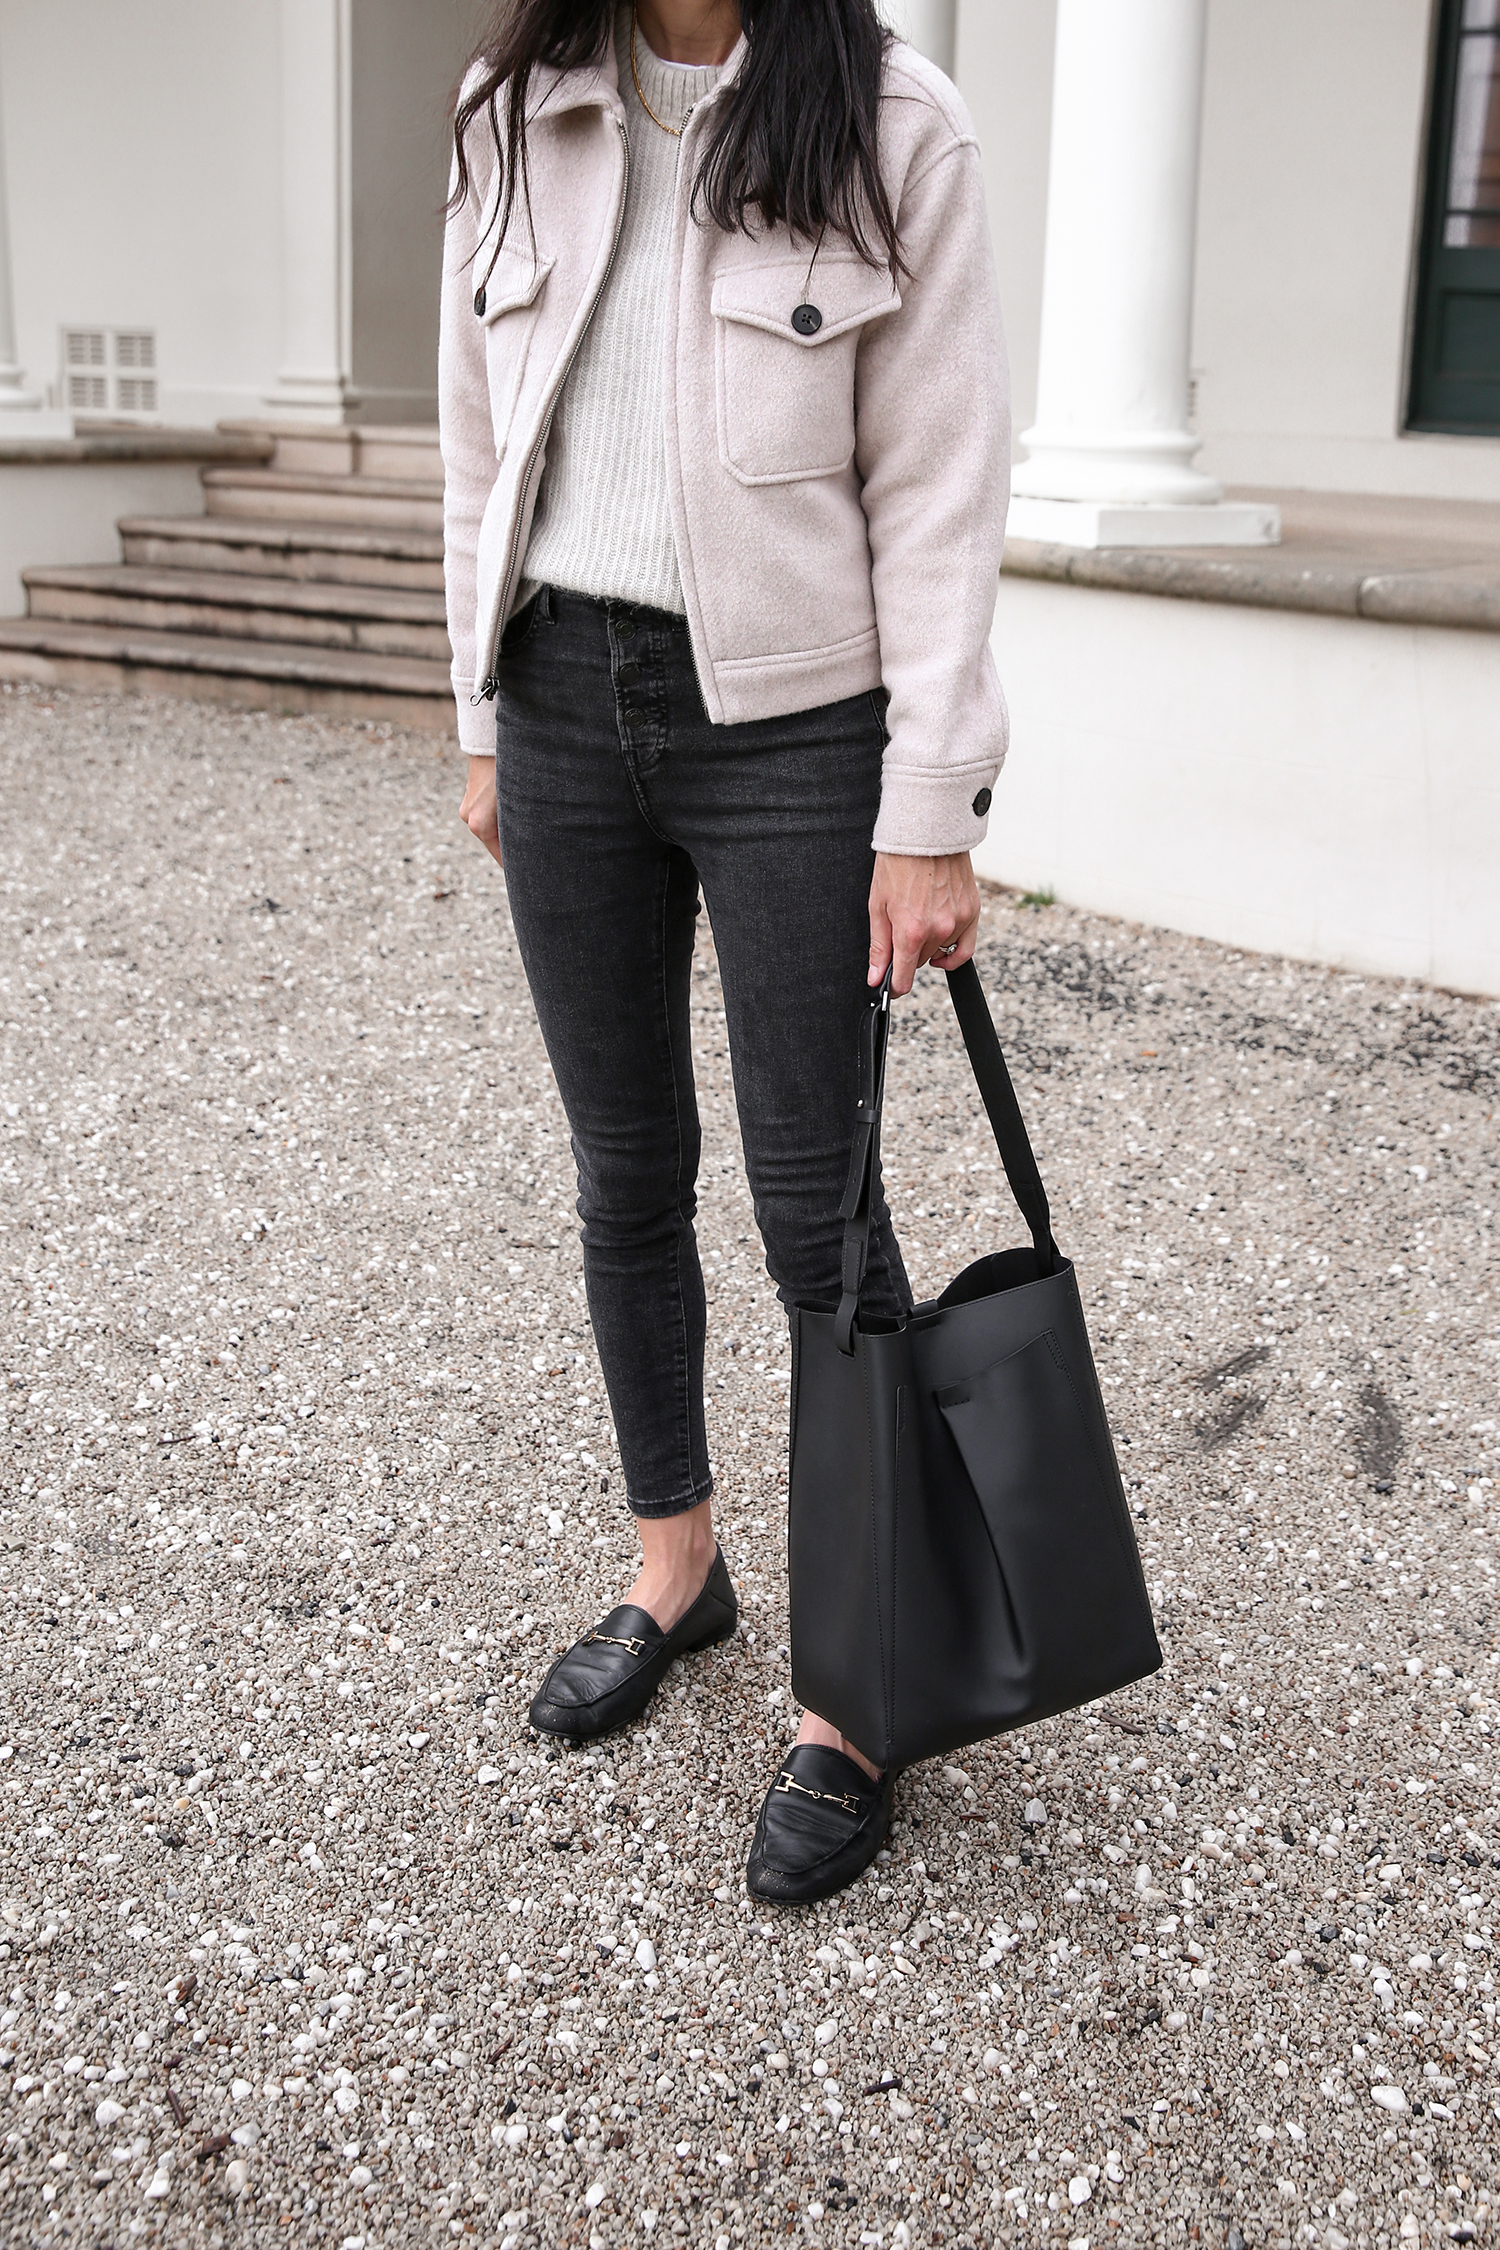 Minimal style outfit in Everlane